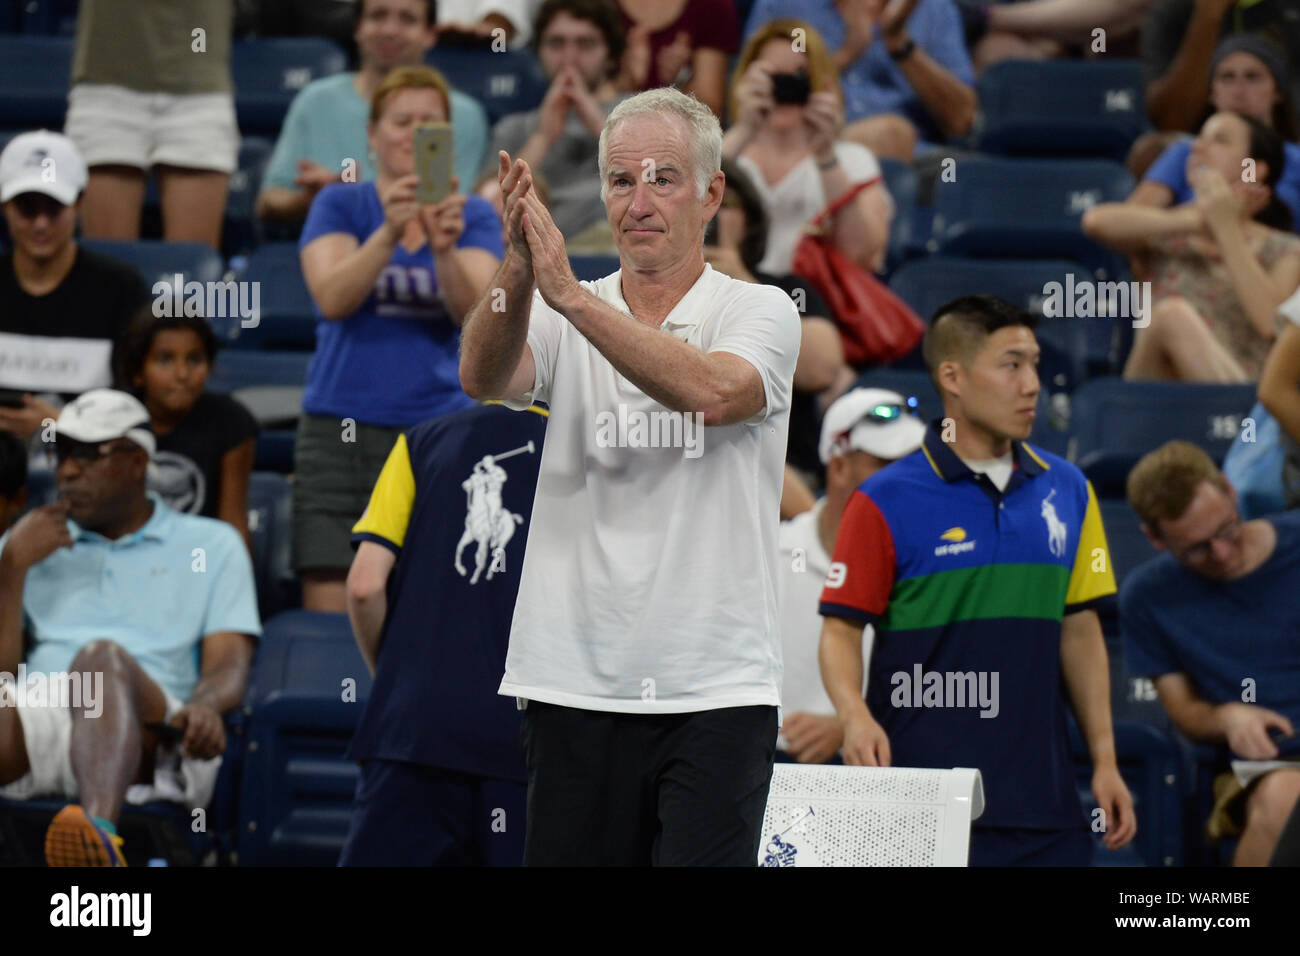 Flushing NY, USA. 21st Aug, 2019. John McEnroe Vs Jim Courier during the Legends match on Louis Armstrong Stadium at the USTA Billie Jean King National Tennis Center on August 21, 2019 in Flushing Queens. Credit: Mpi04/Media Punch/Alamy Live News Stock Photo